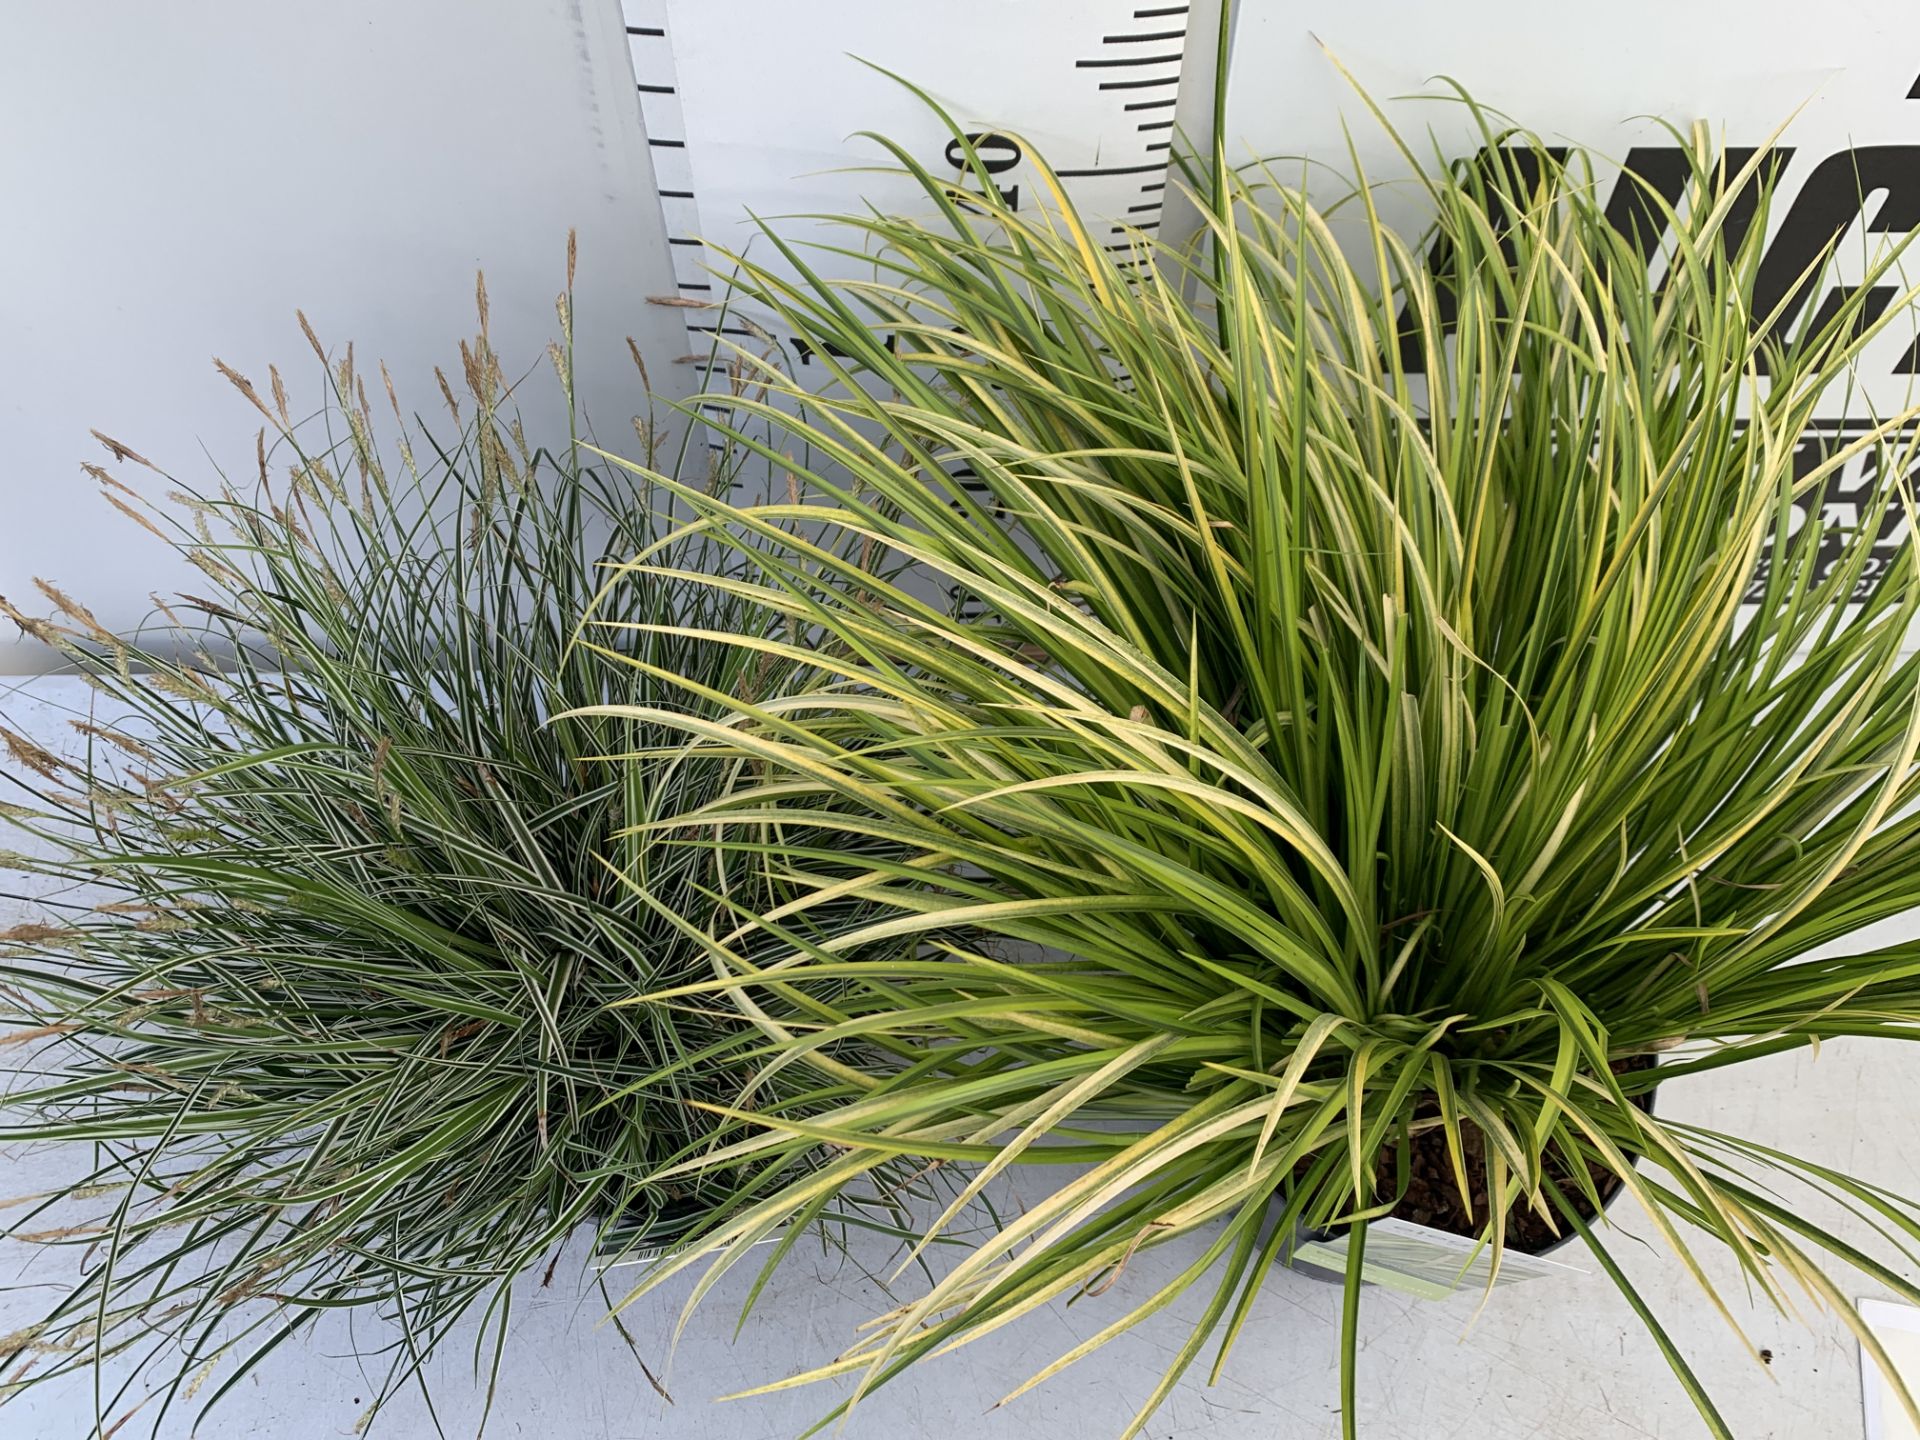 TWO HARDY AND EVERGREEN GRASSES CAREX OSHIMENSIS AND ACORUS GRAMINEUS IN 3 LTR POTS 45CM TALL PLUS - Image 3 of 12